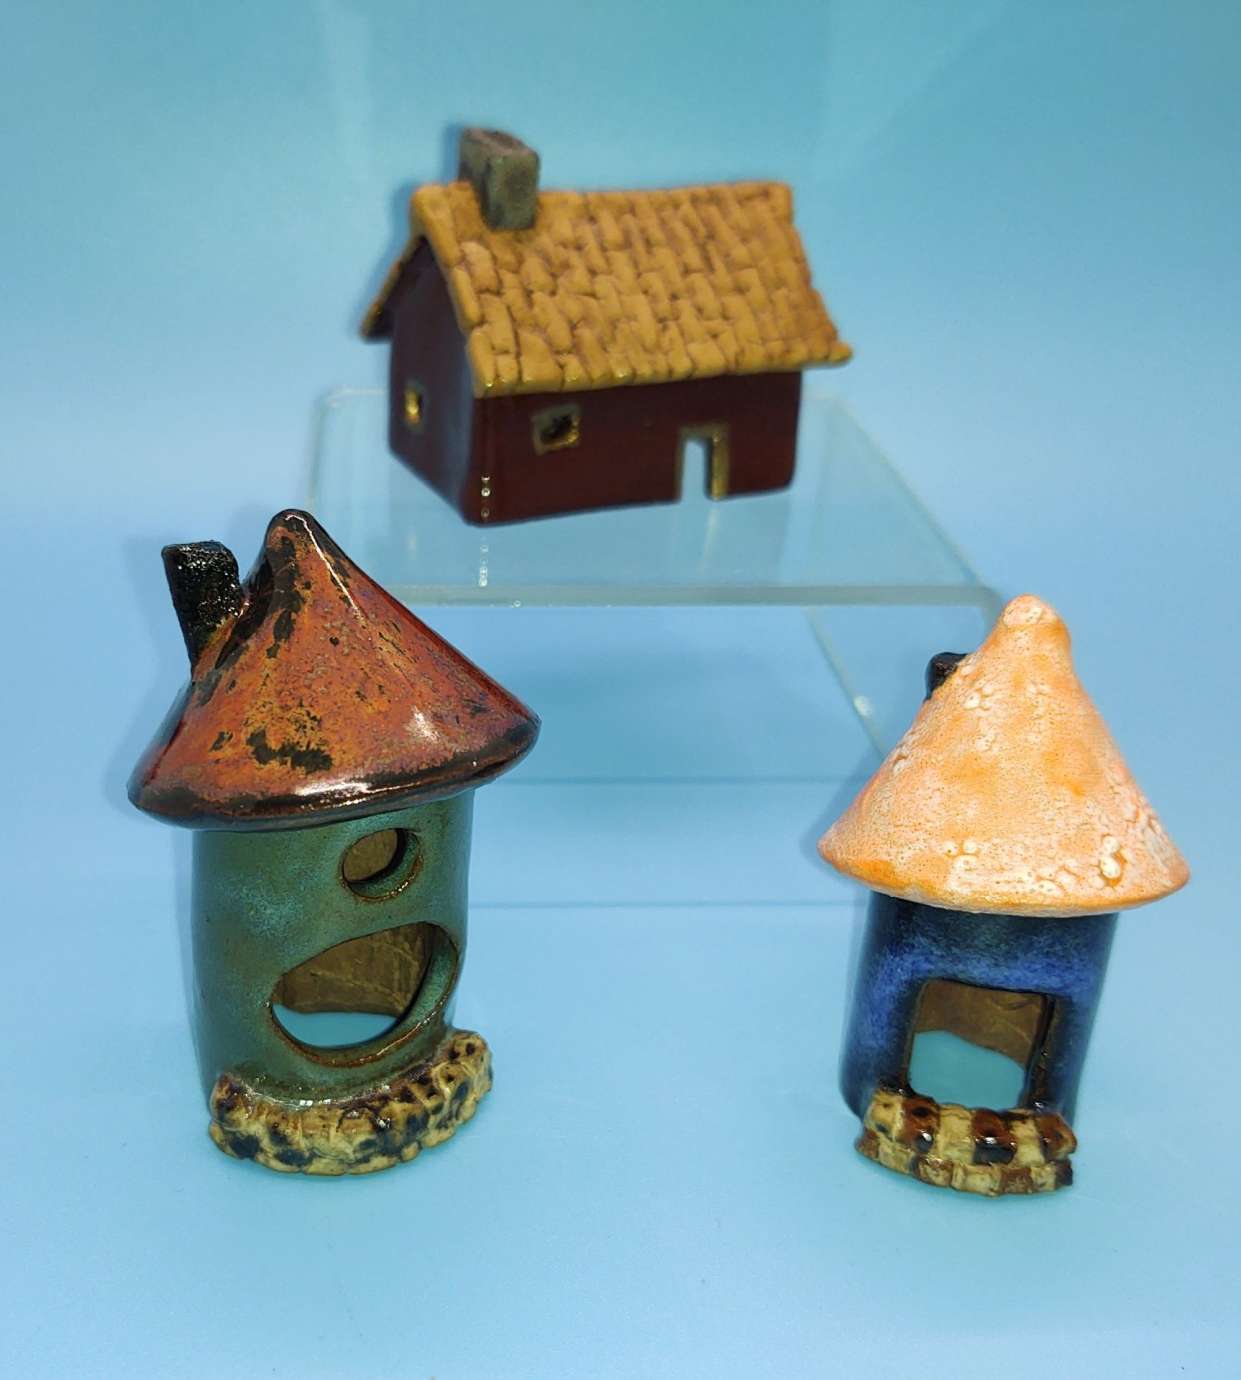 A photograph of three small ceramic houses